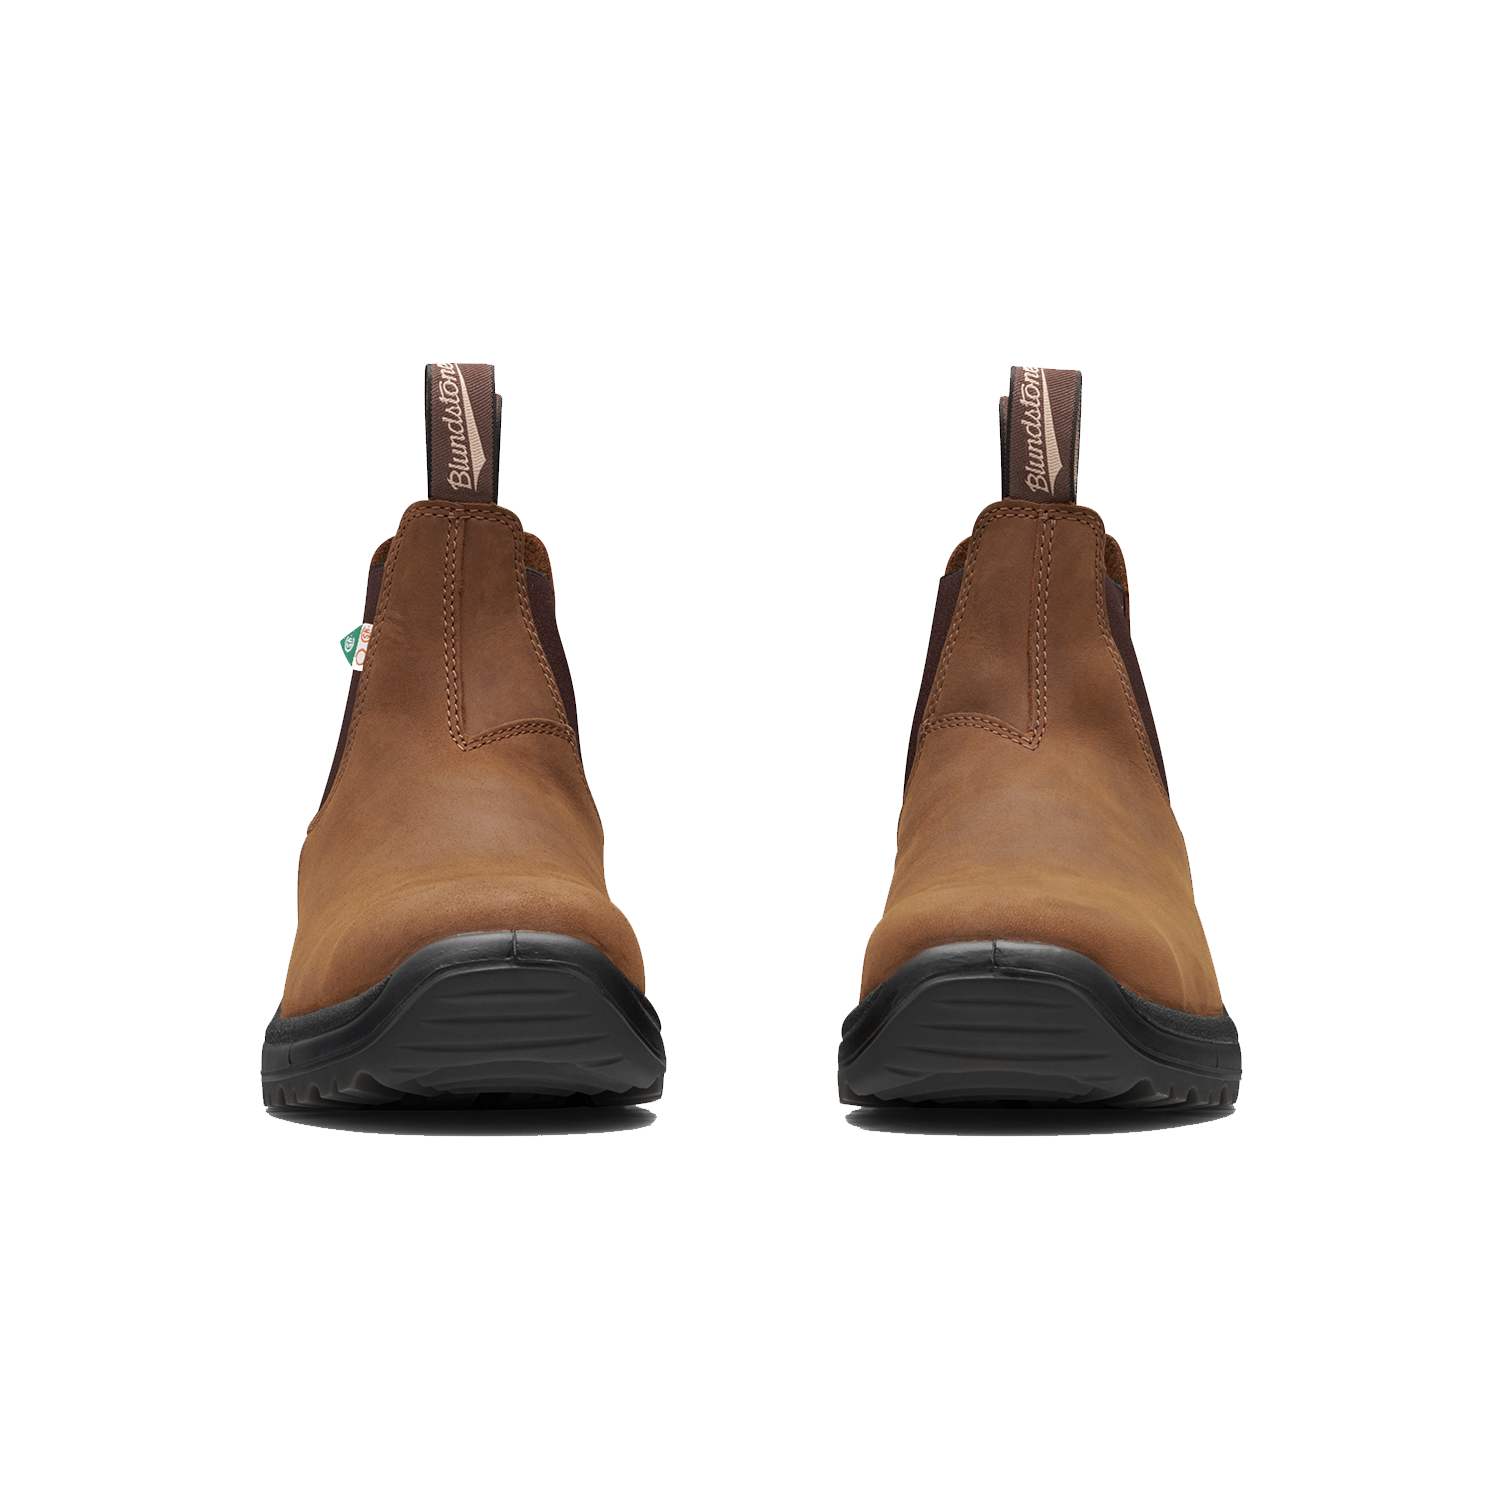 Blundstone 164 Work & Safety Boot Saddle Brown